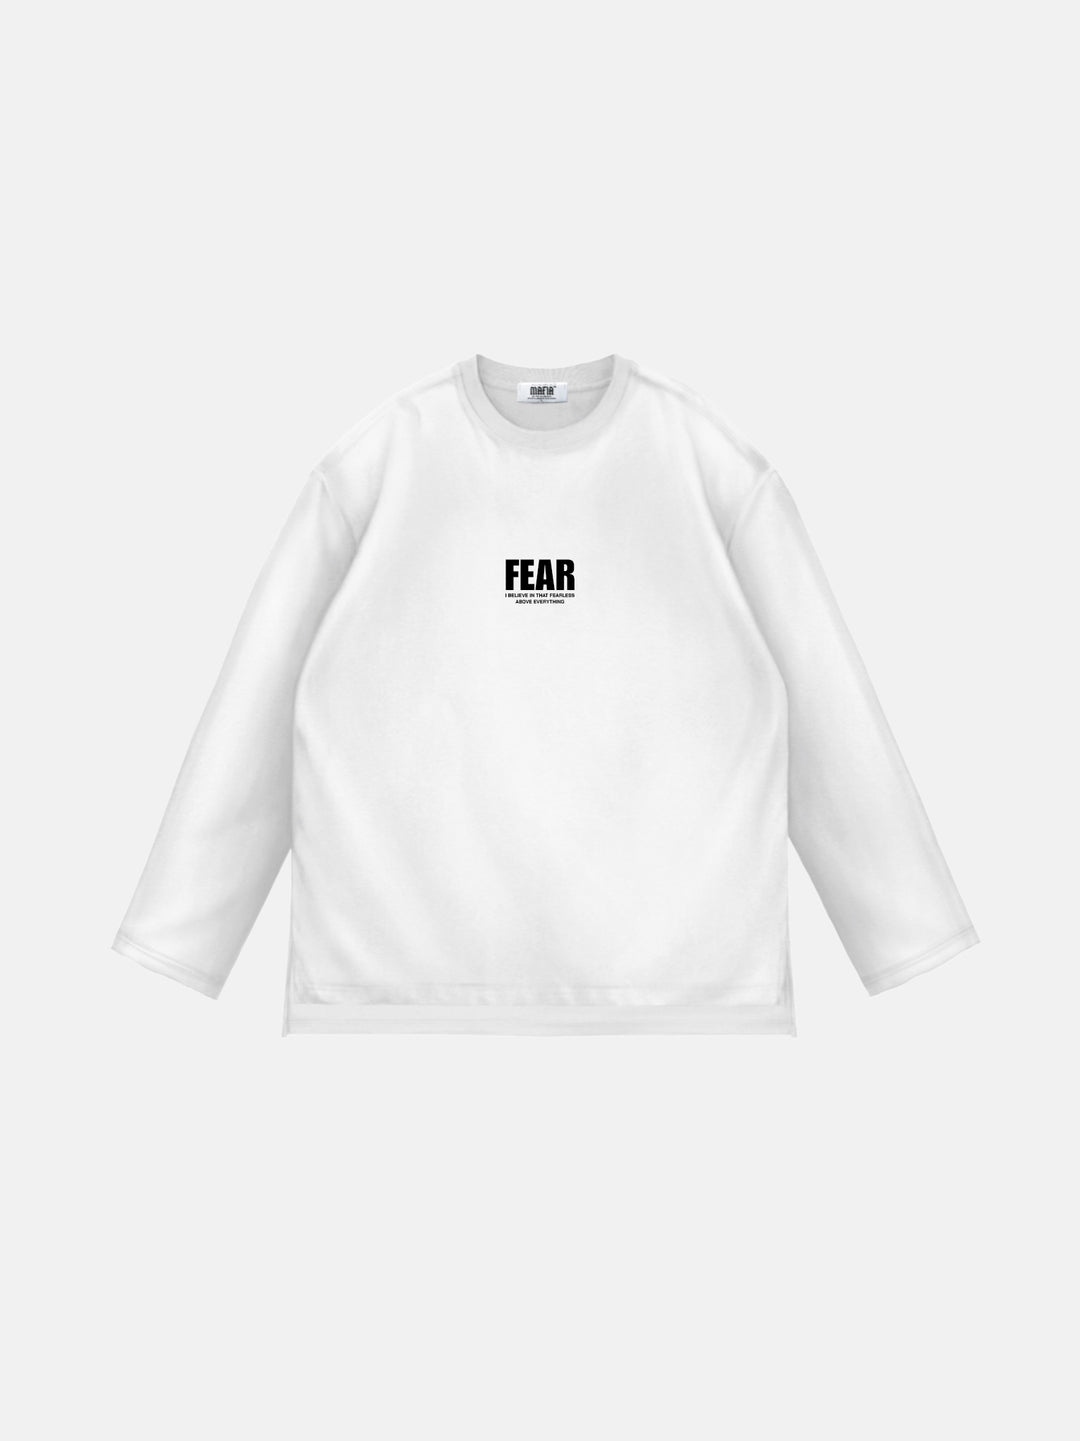 Oversize Fear Sweater - White